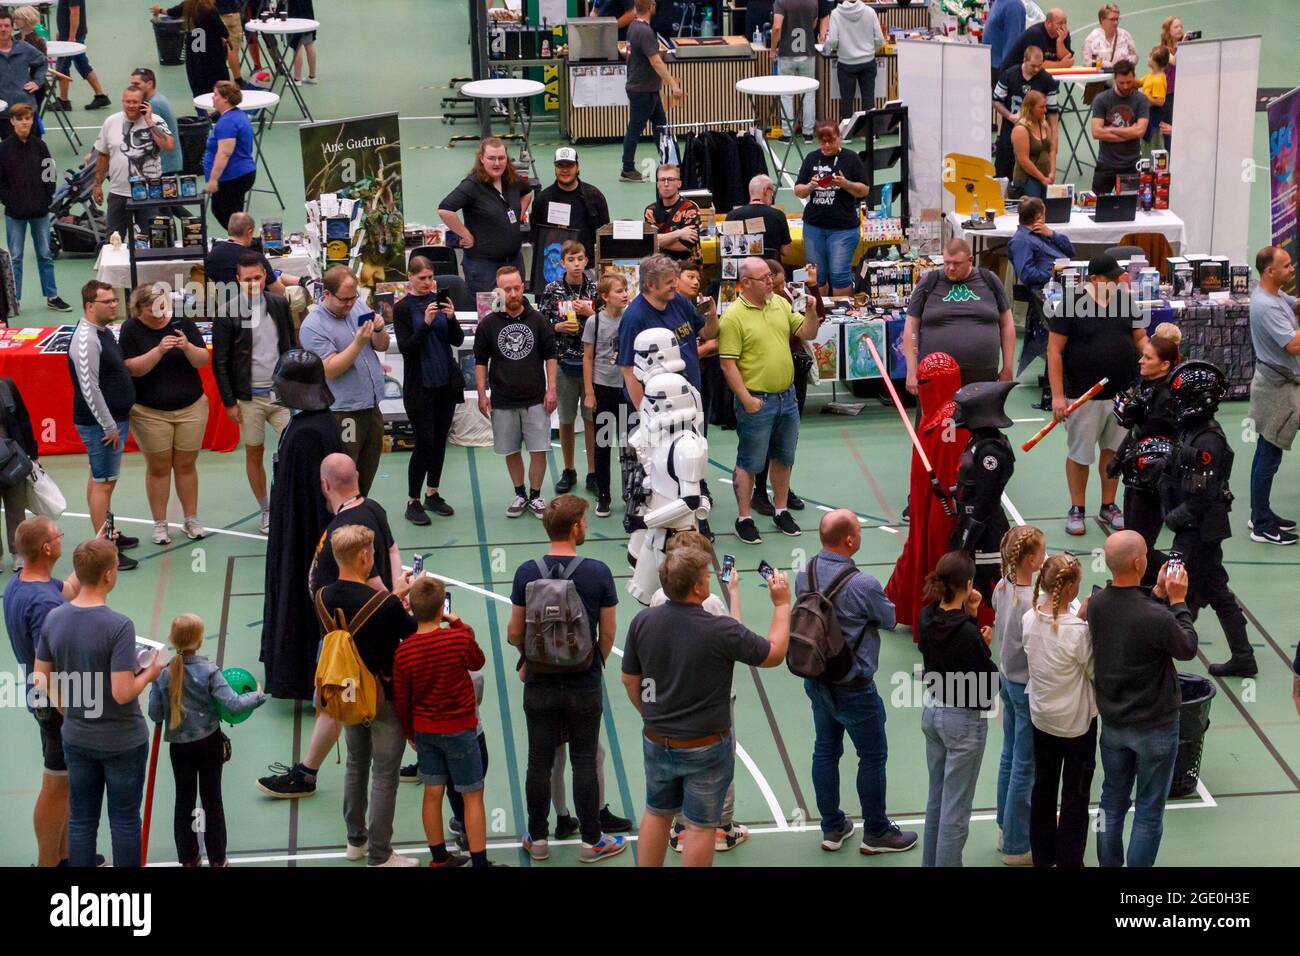 Randers, Denmark - 15 August 2021: A day in the galaxy, Big star wars event in Randers Arena where adults and children could meet all the characters f Stock Photo